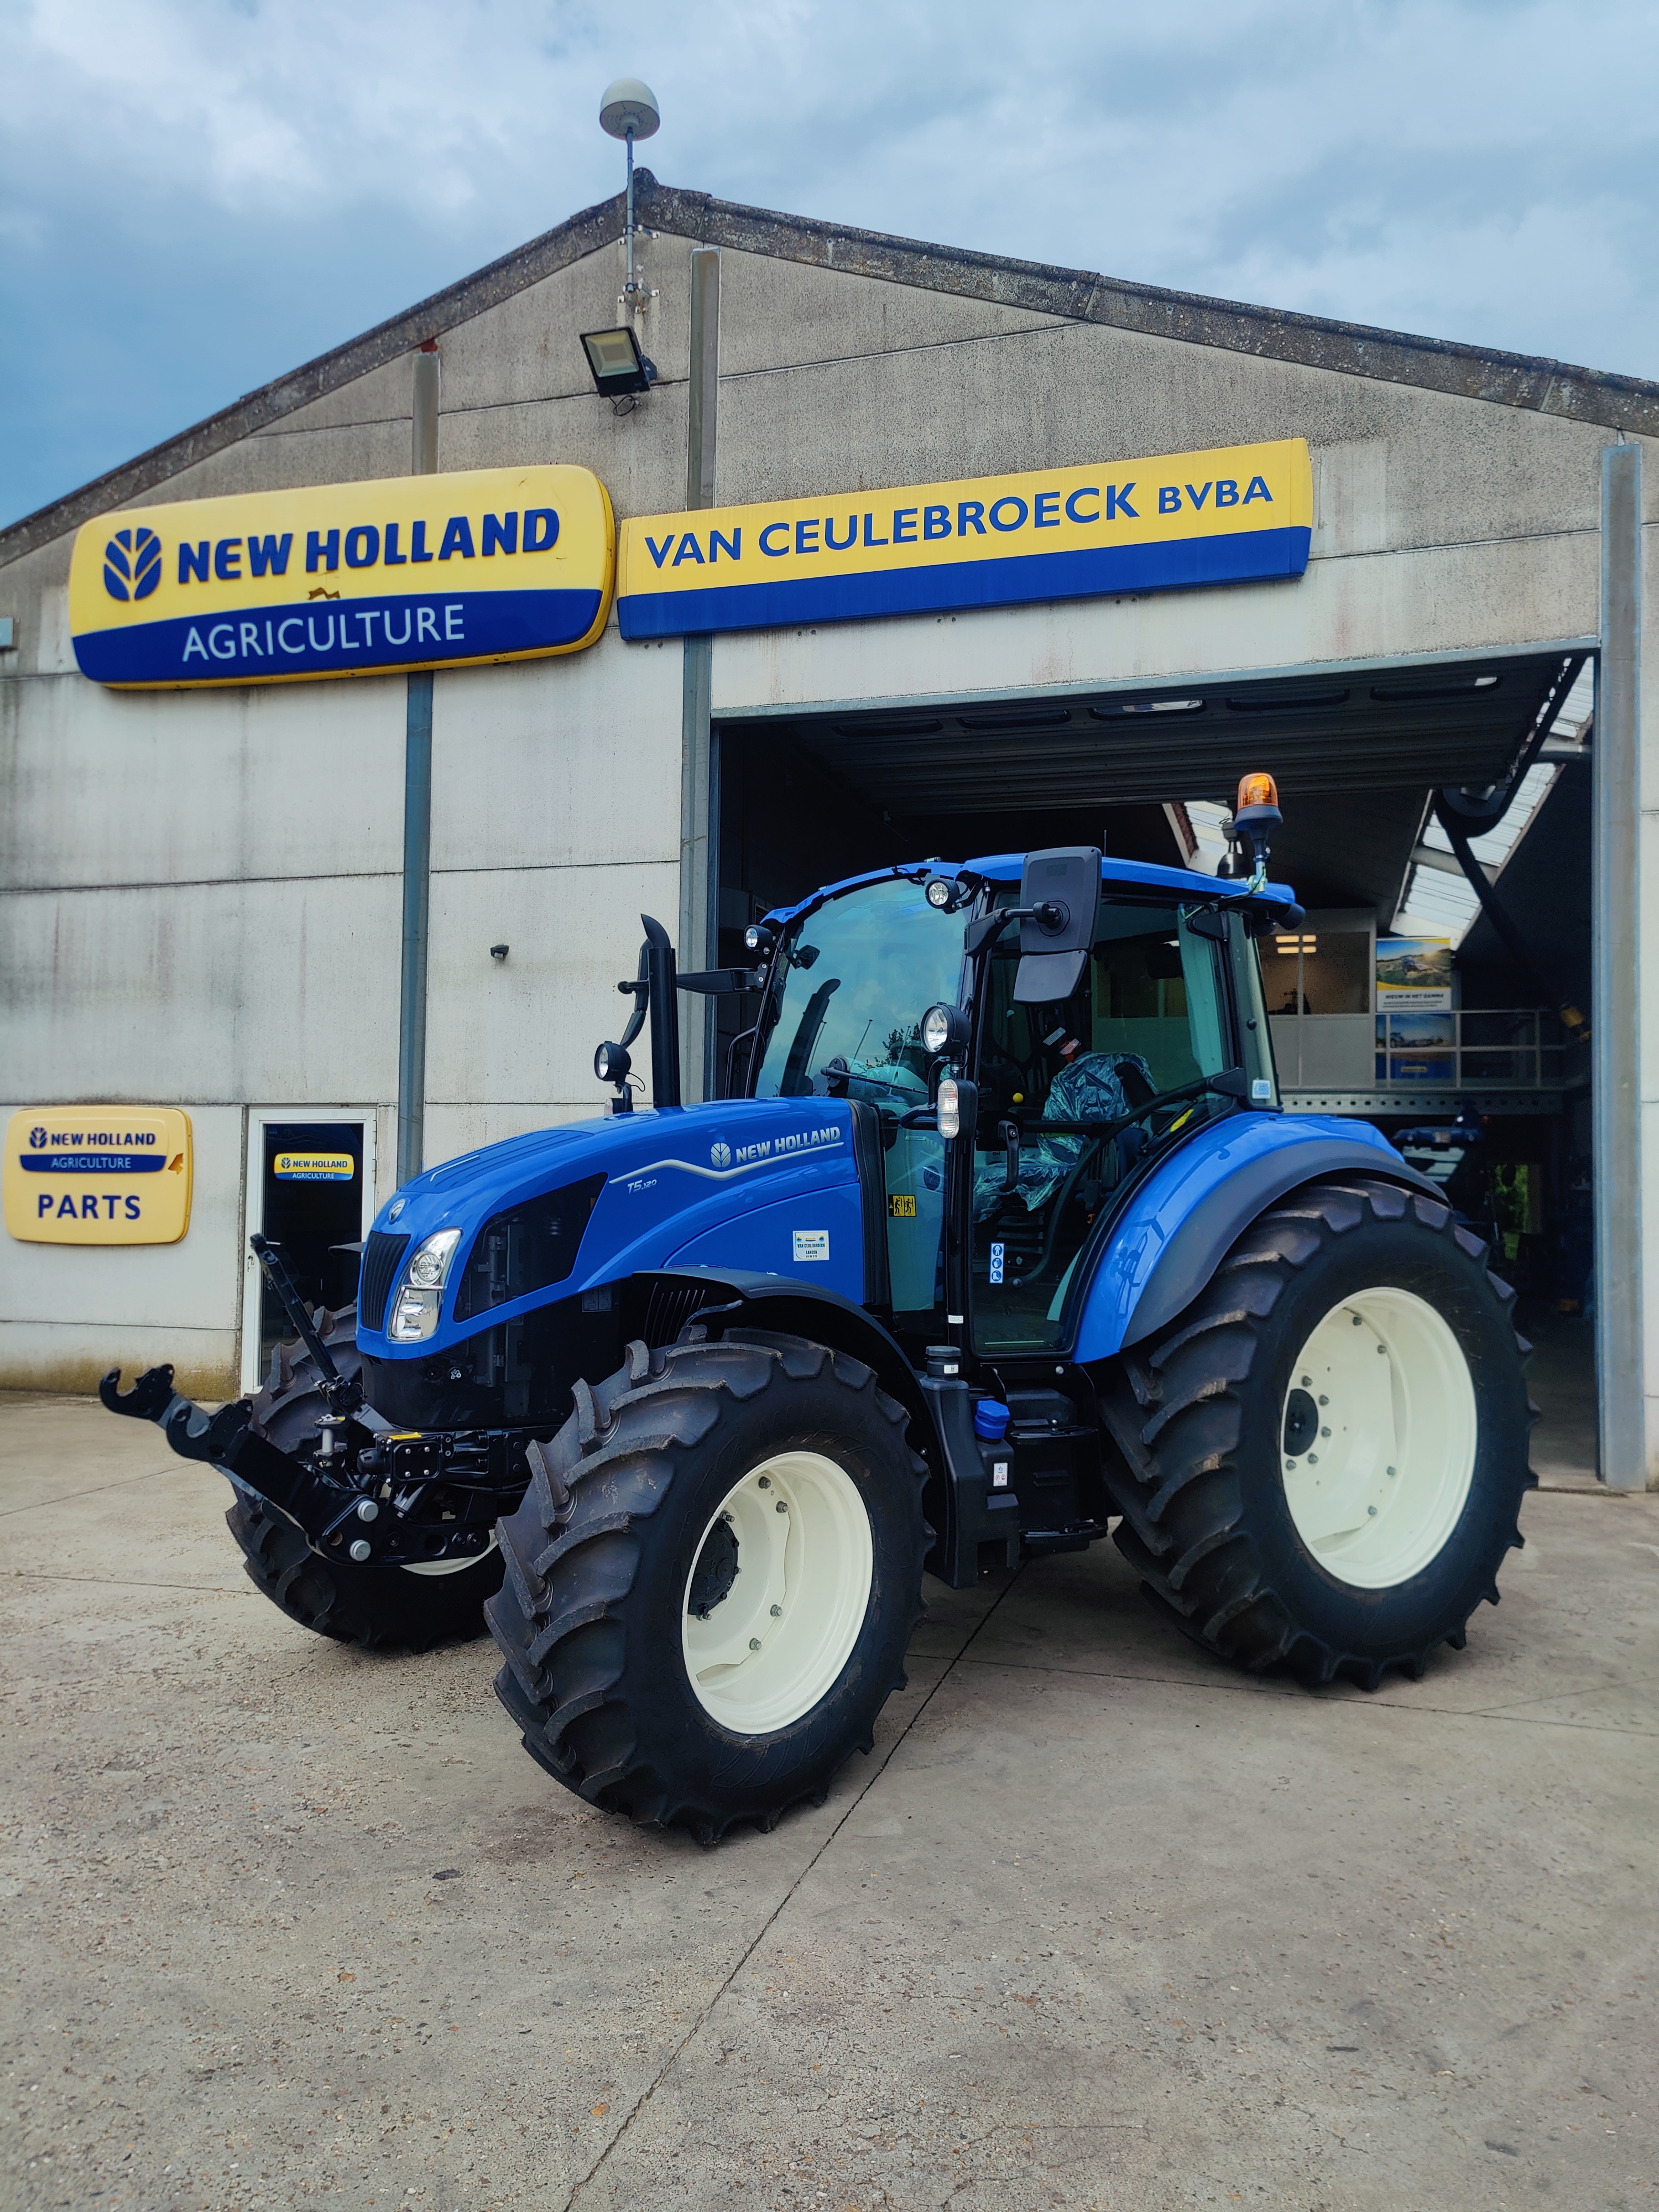 New Holland T5.120 Utility afgeleverd !!